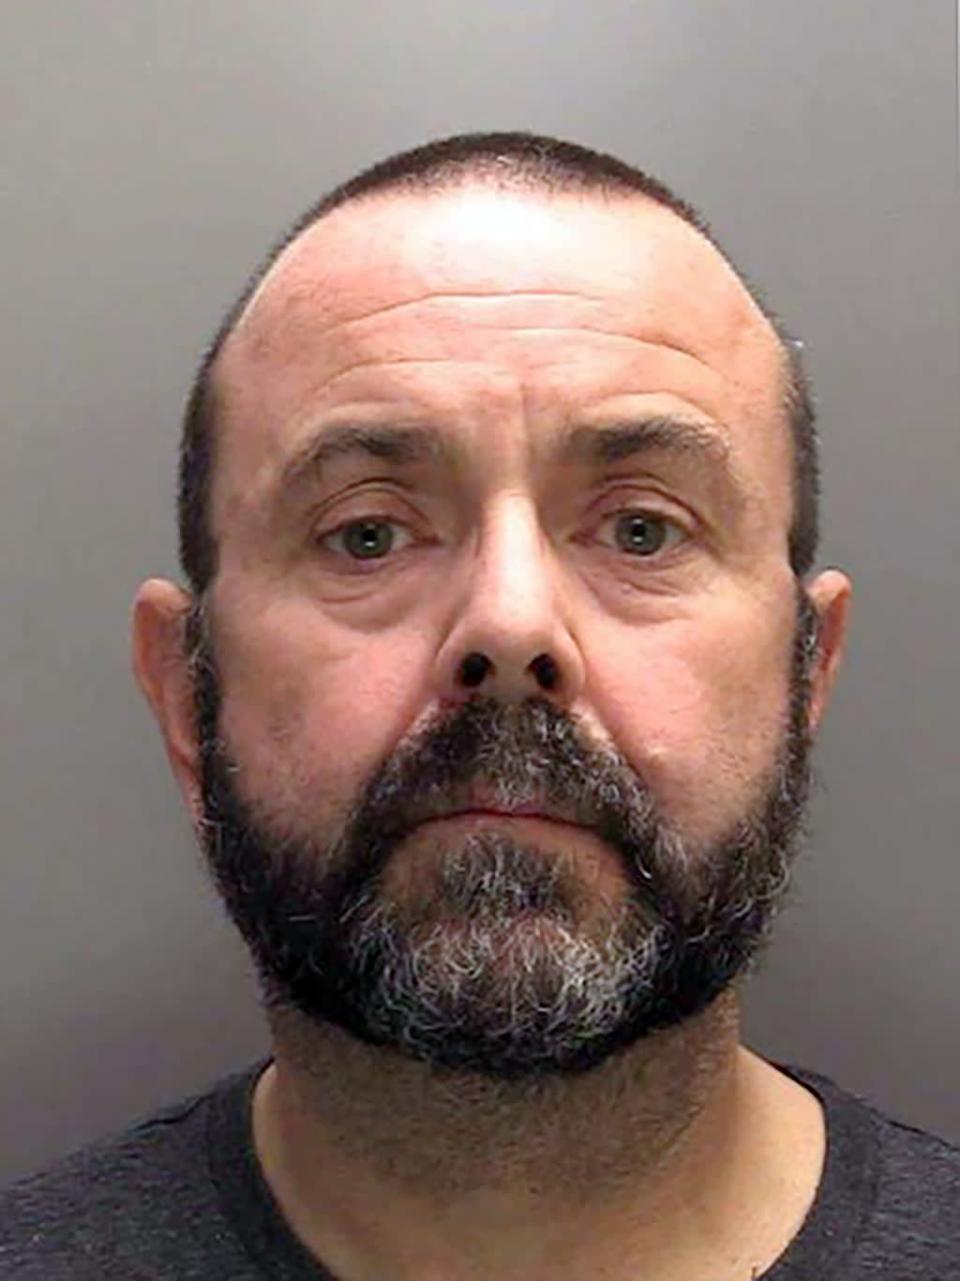 David Morris, 52, was found guilty of 34 offences, including seven counts of rape and 13 counts of causing or inciting a child under 13 to engage in sexual activity (Merseyside Police/PA). (PA Media)